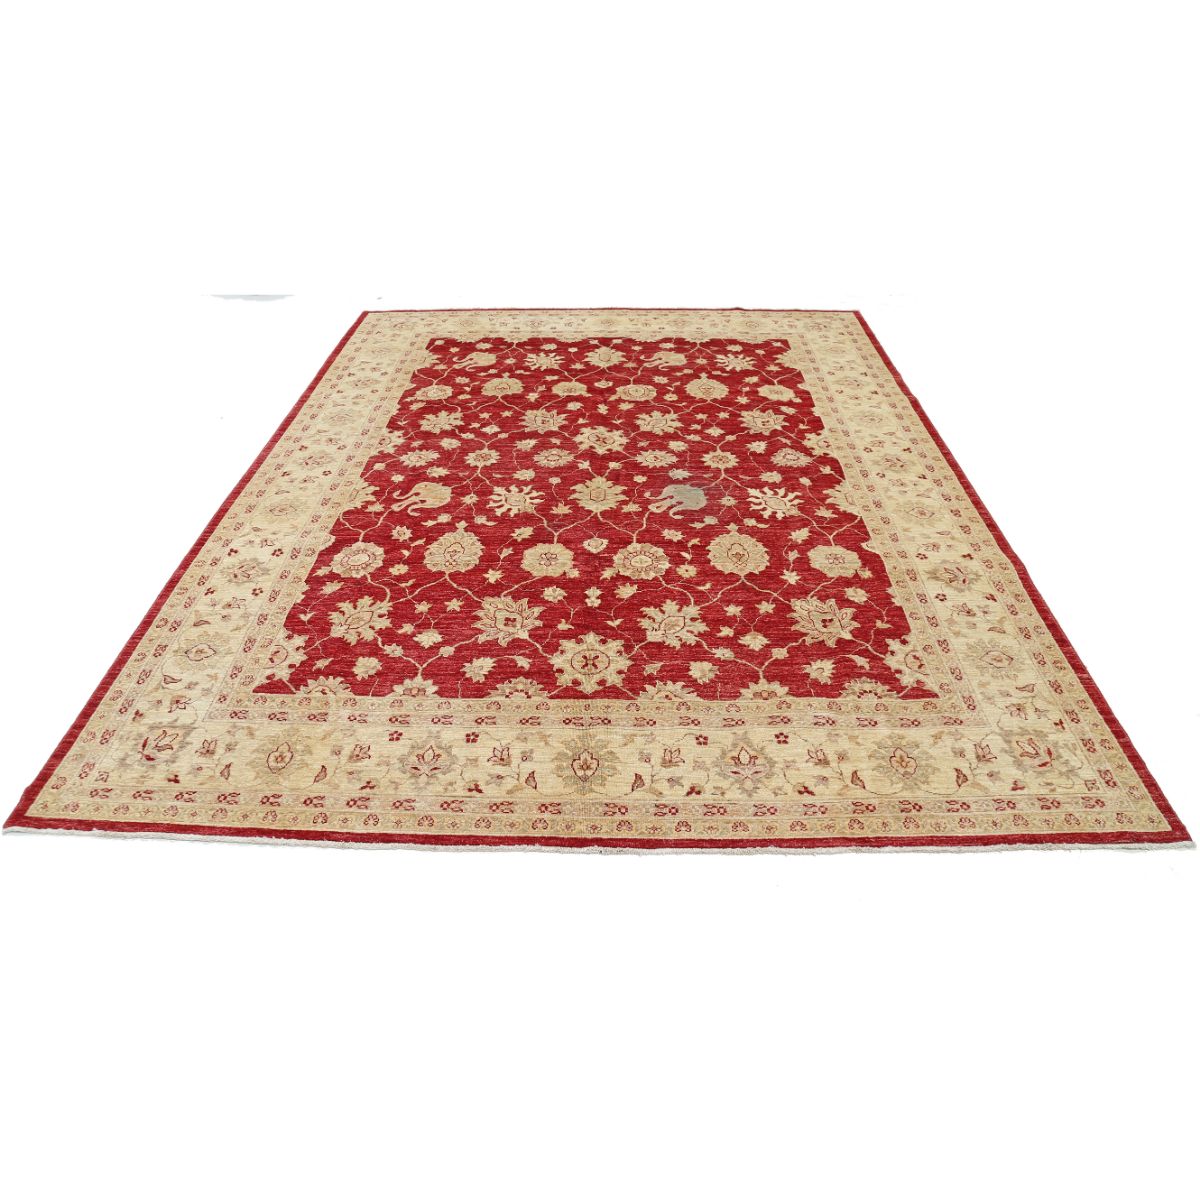 Ziegler 7'10" X 10'3" Wool Hand-Knotted Rug